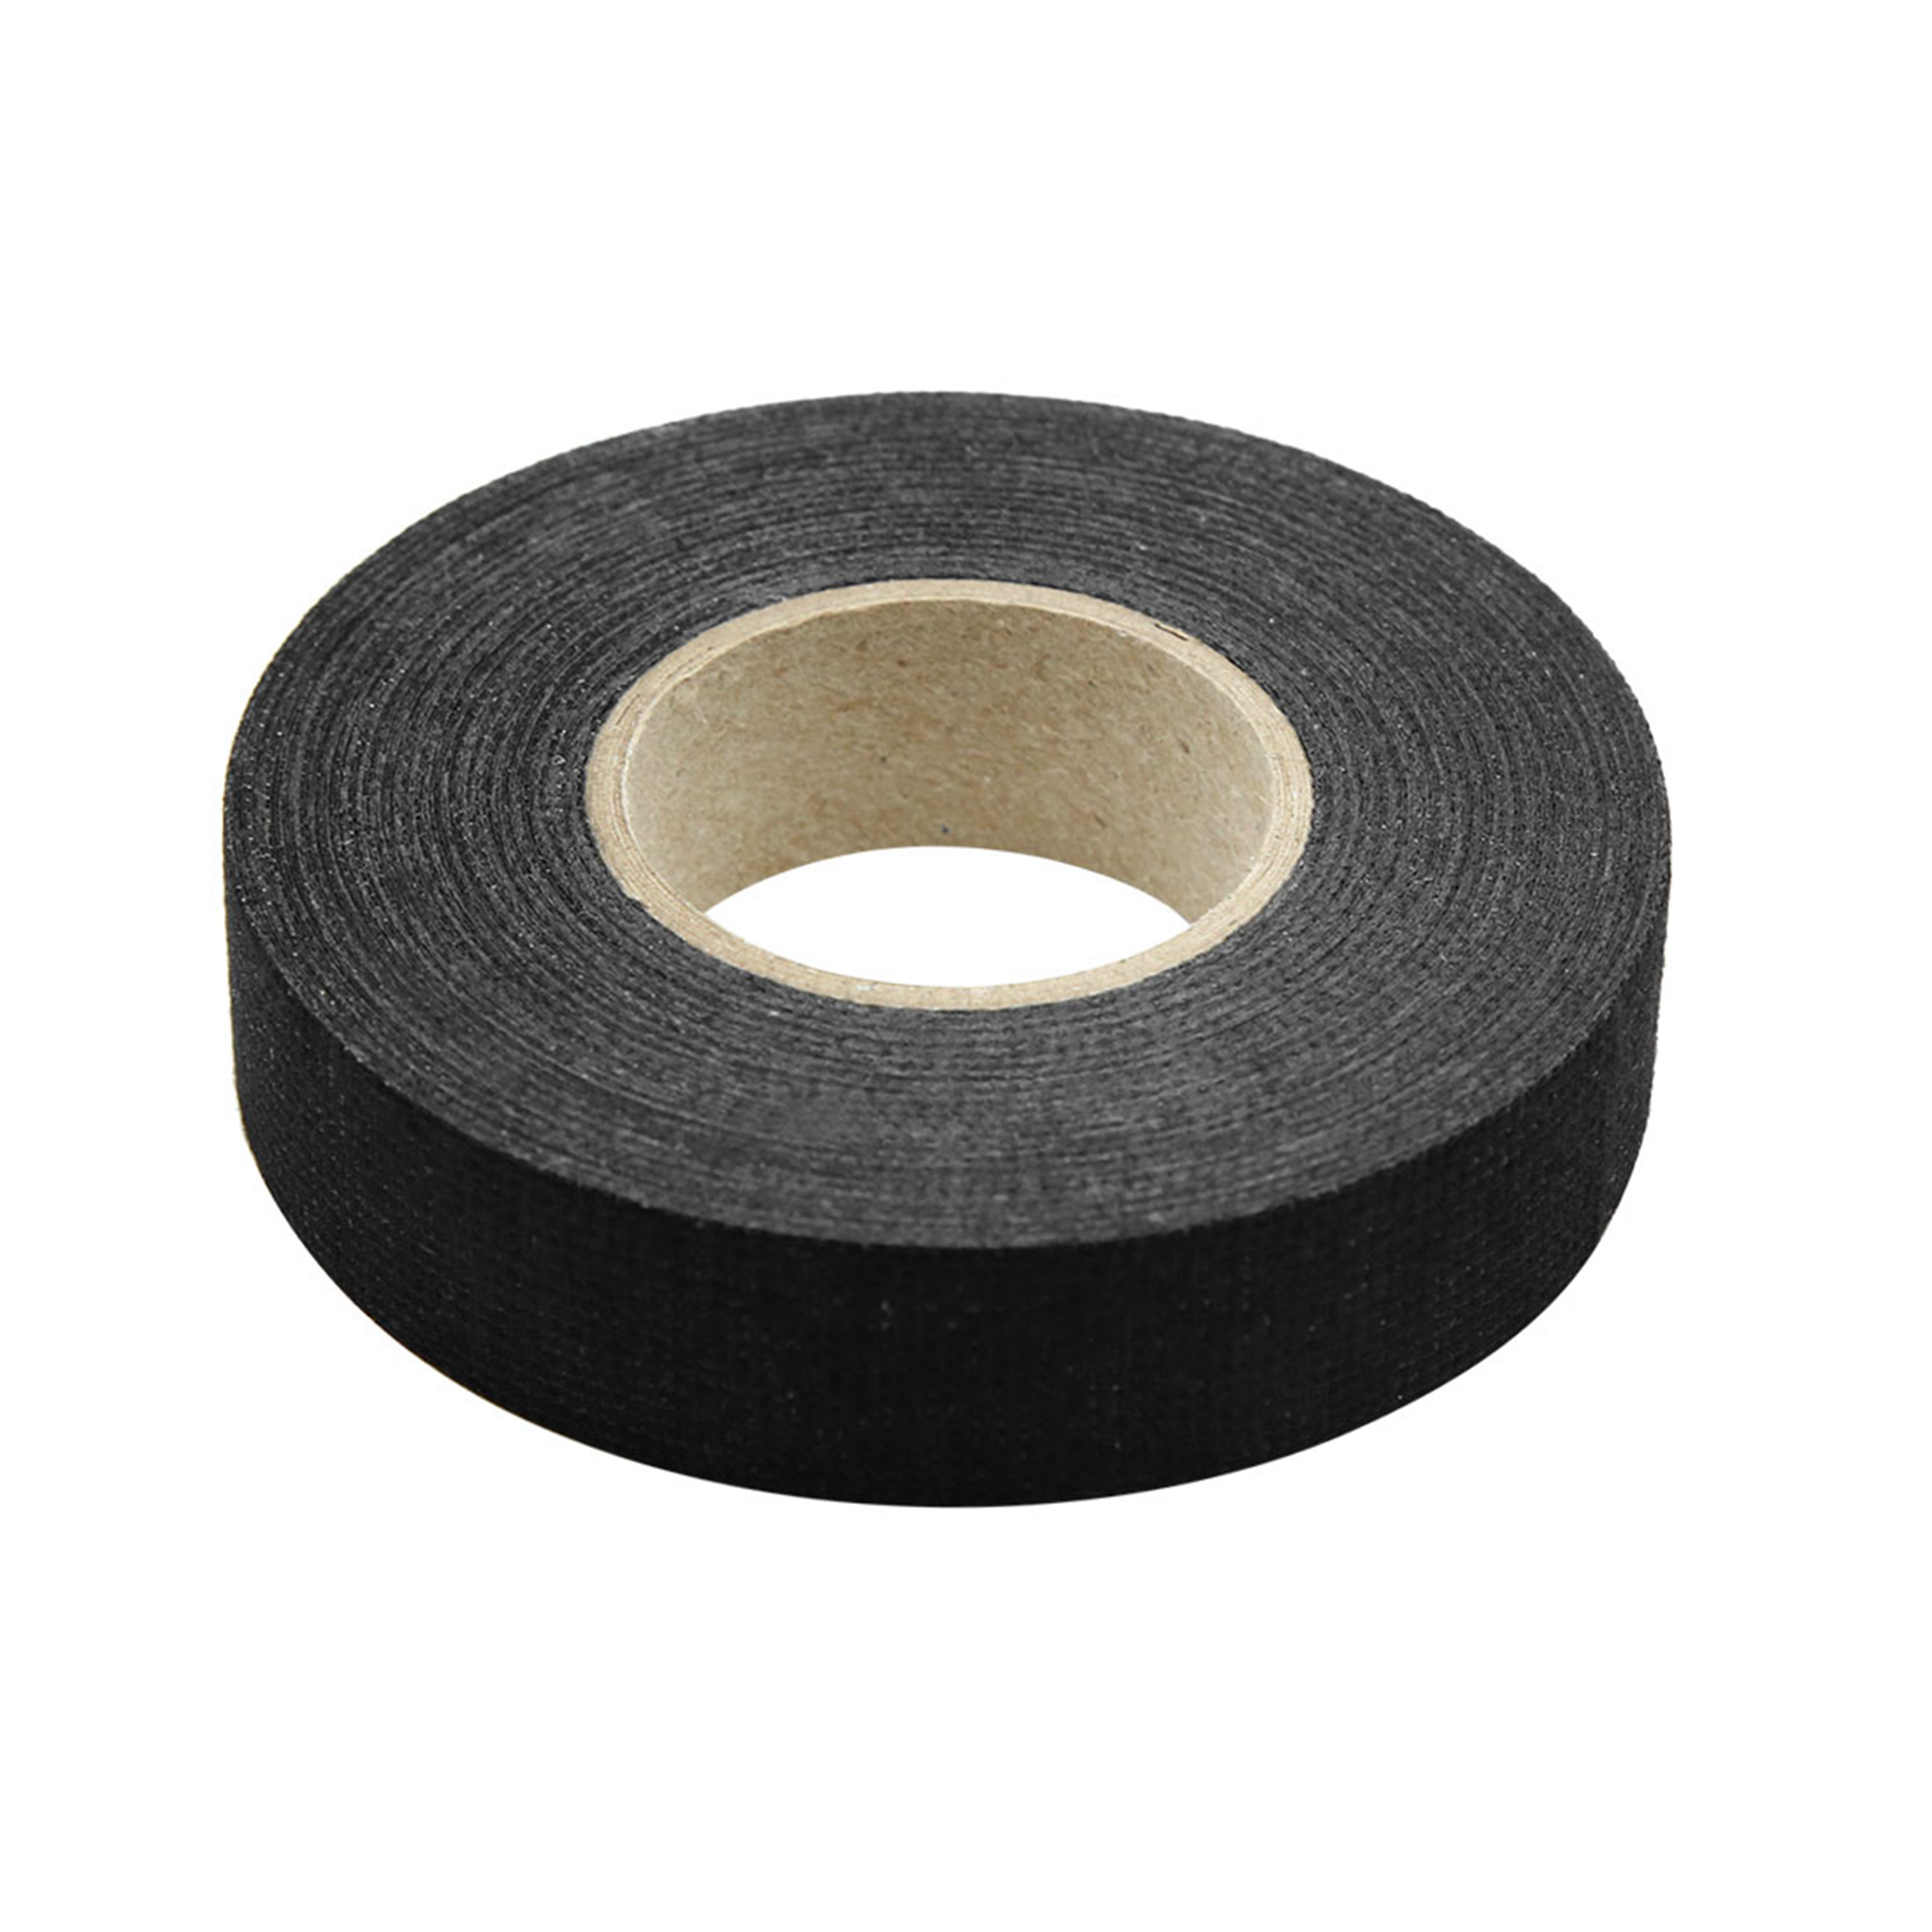 Unique Bargains Black Universal Adhesive Cloth Fabric Car Wire Harness Looms Tape 19mm x 15m